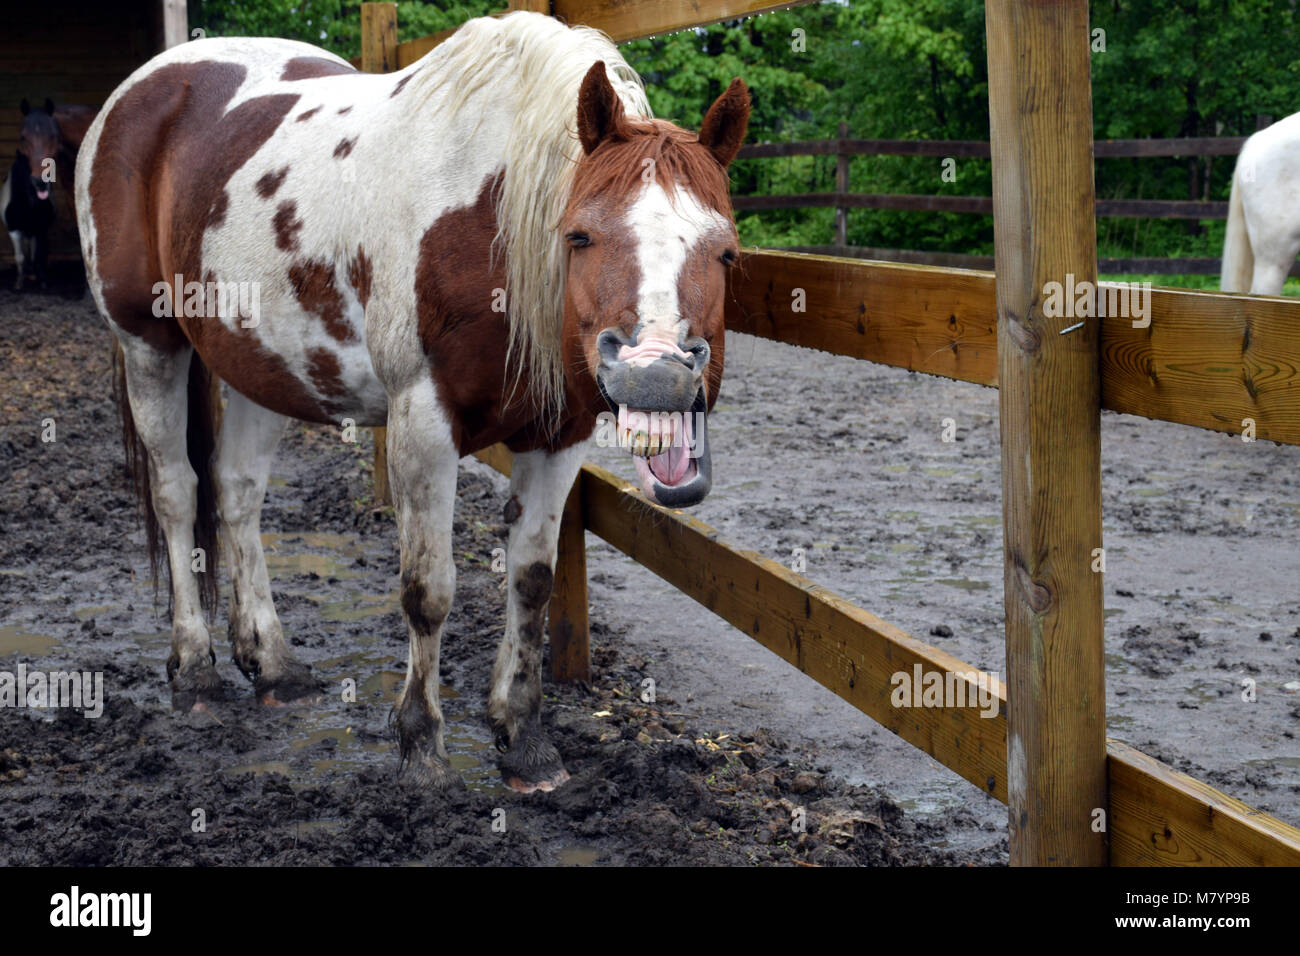 A laughing horse Stock Photo